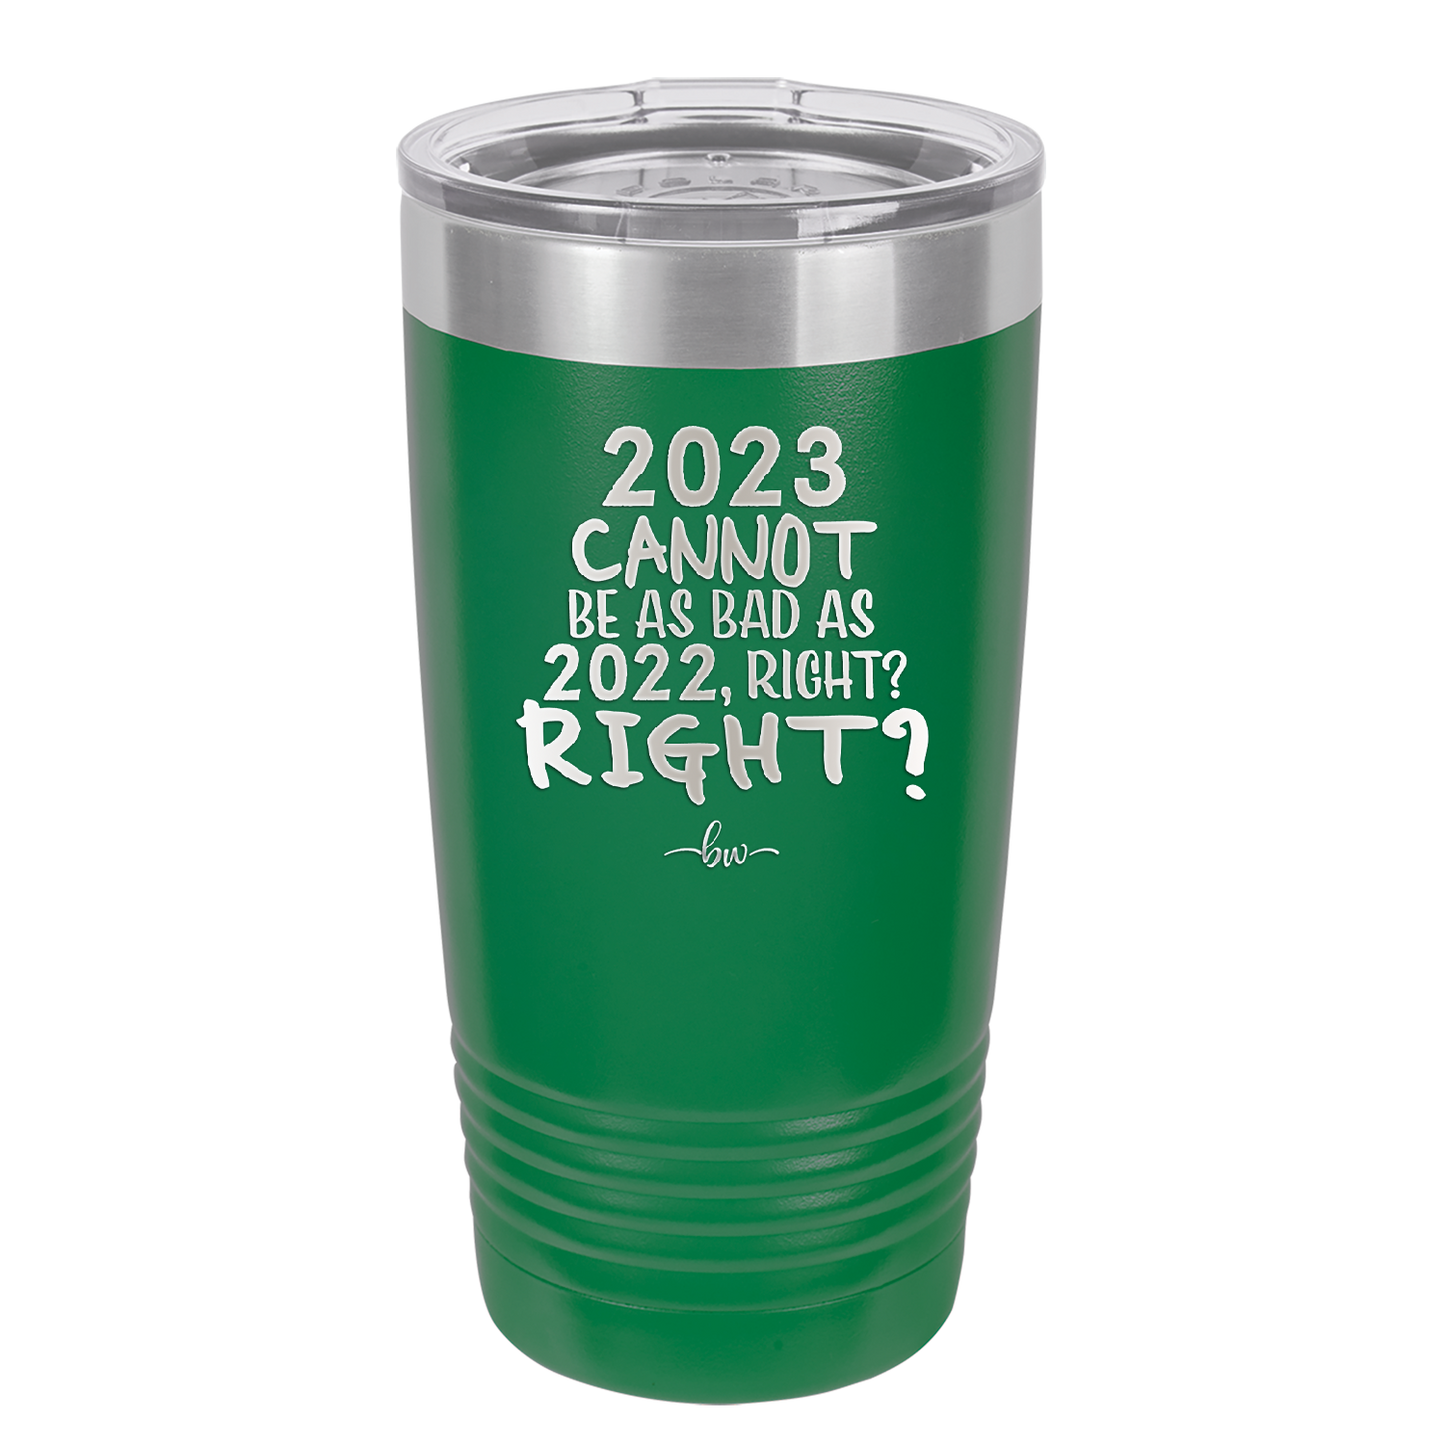 20 oz  2023 cannot be as bas as 2022, right?right? - green